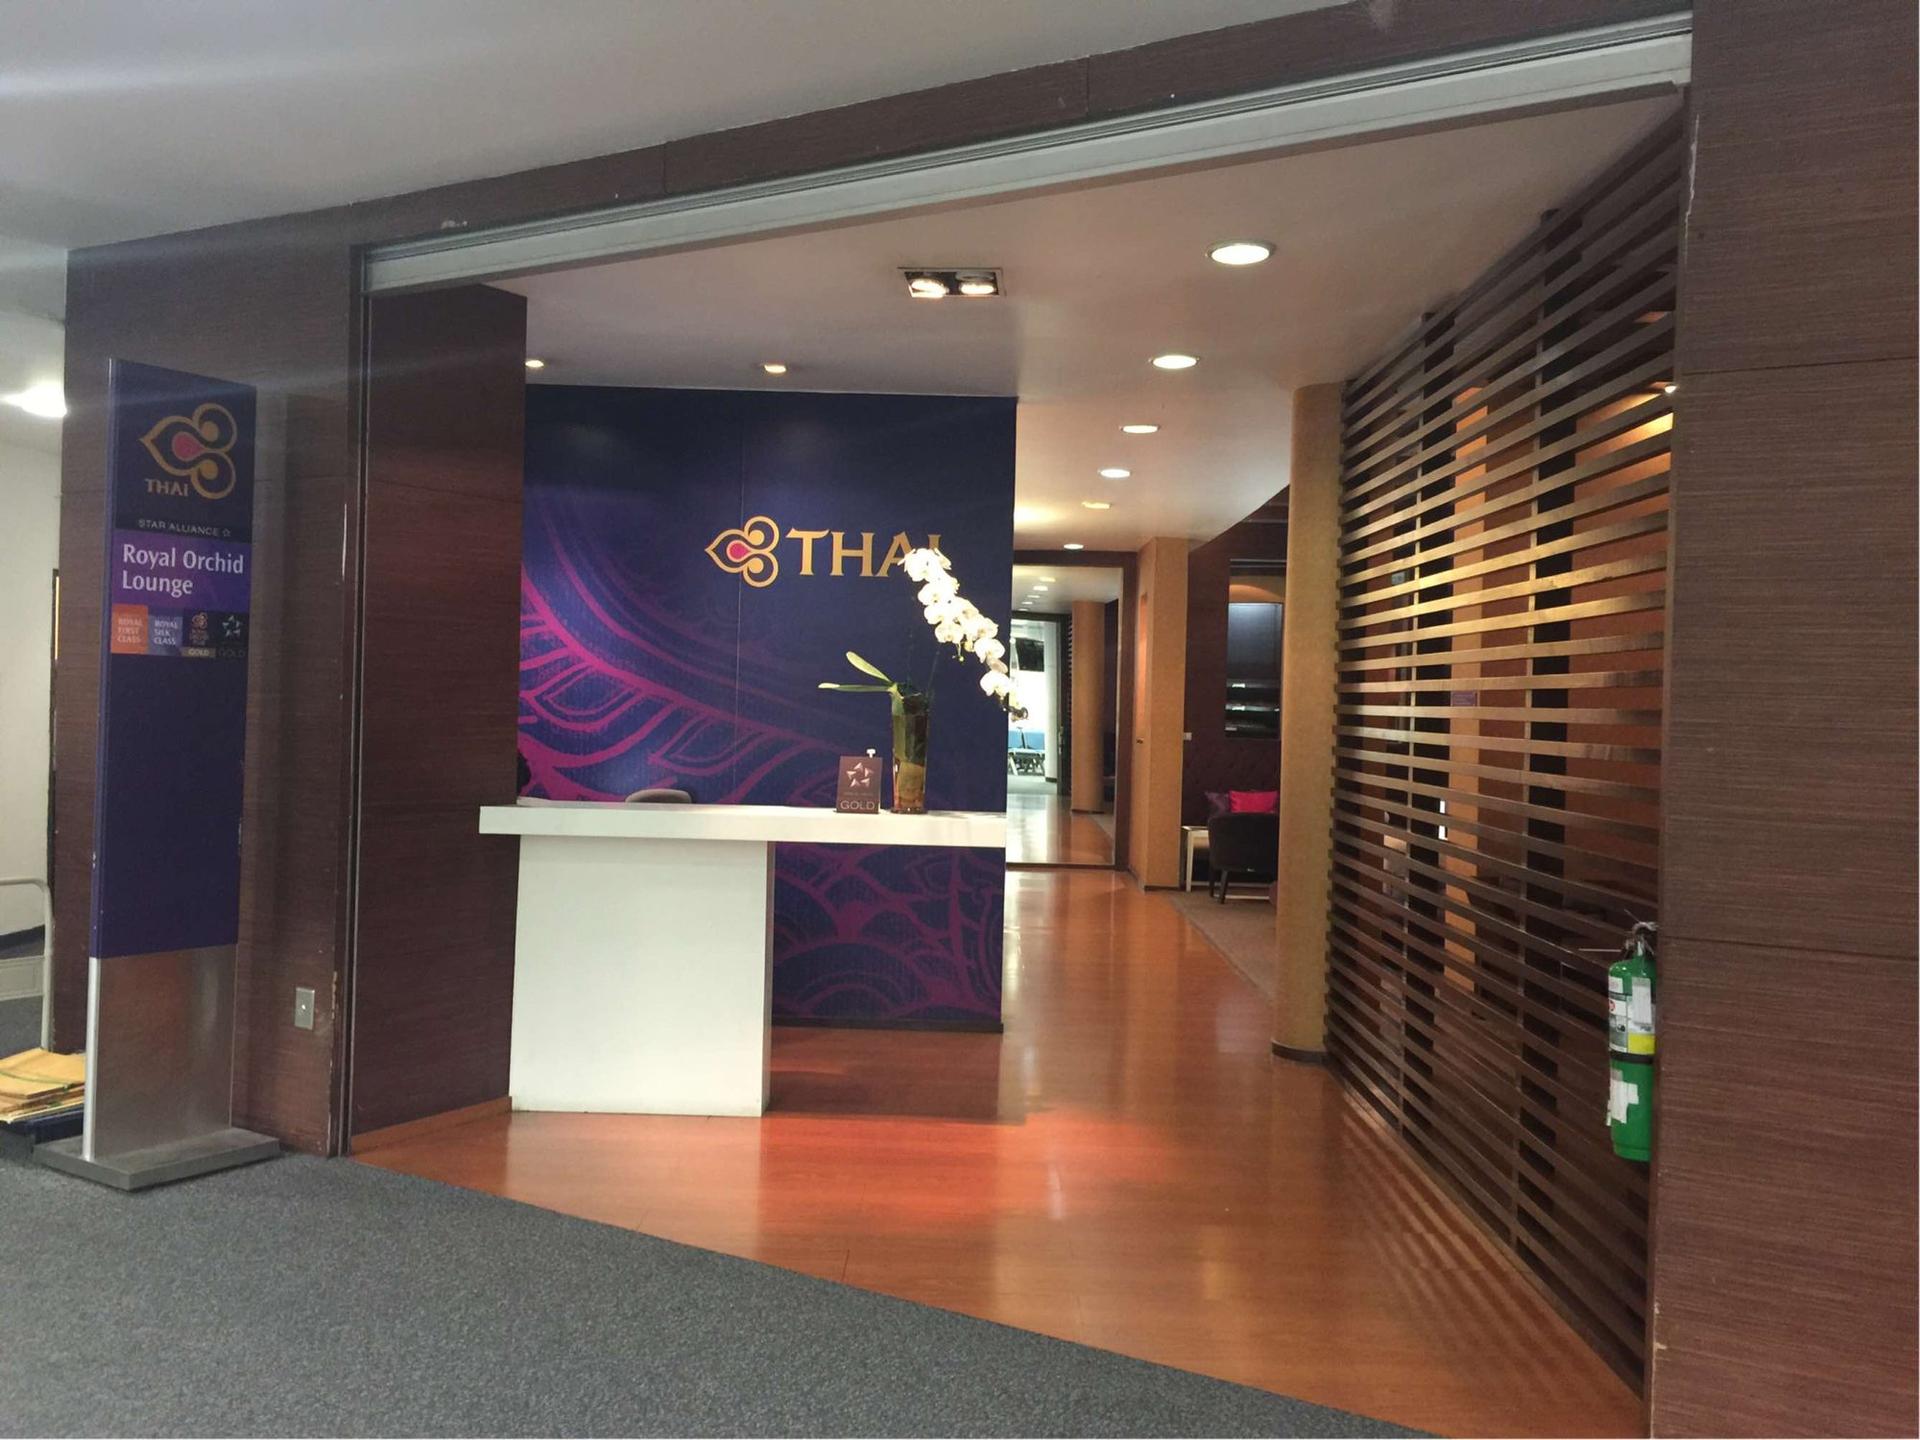 Thai Airways Royal Orchid Lounge image 16 of 22